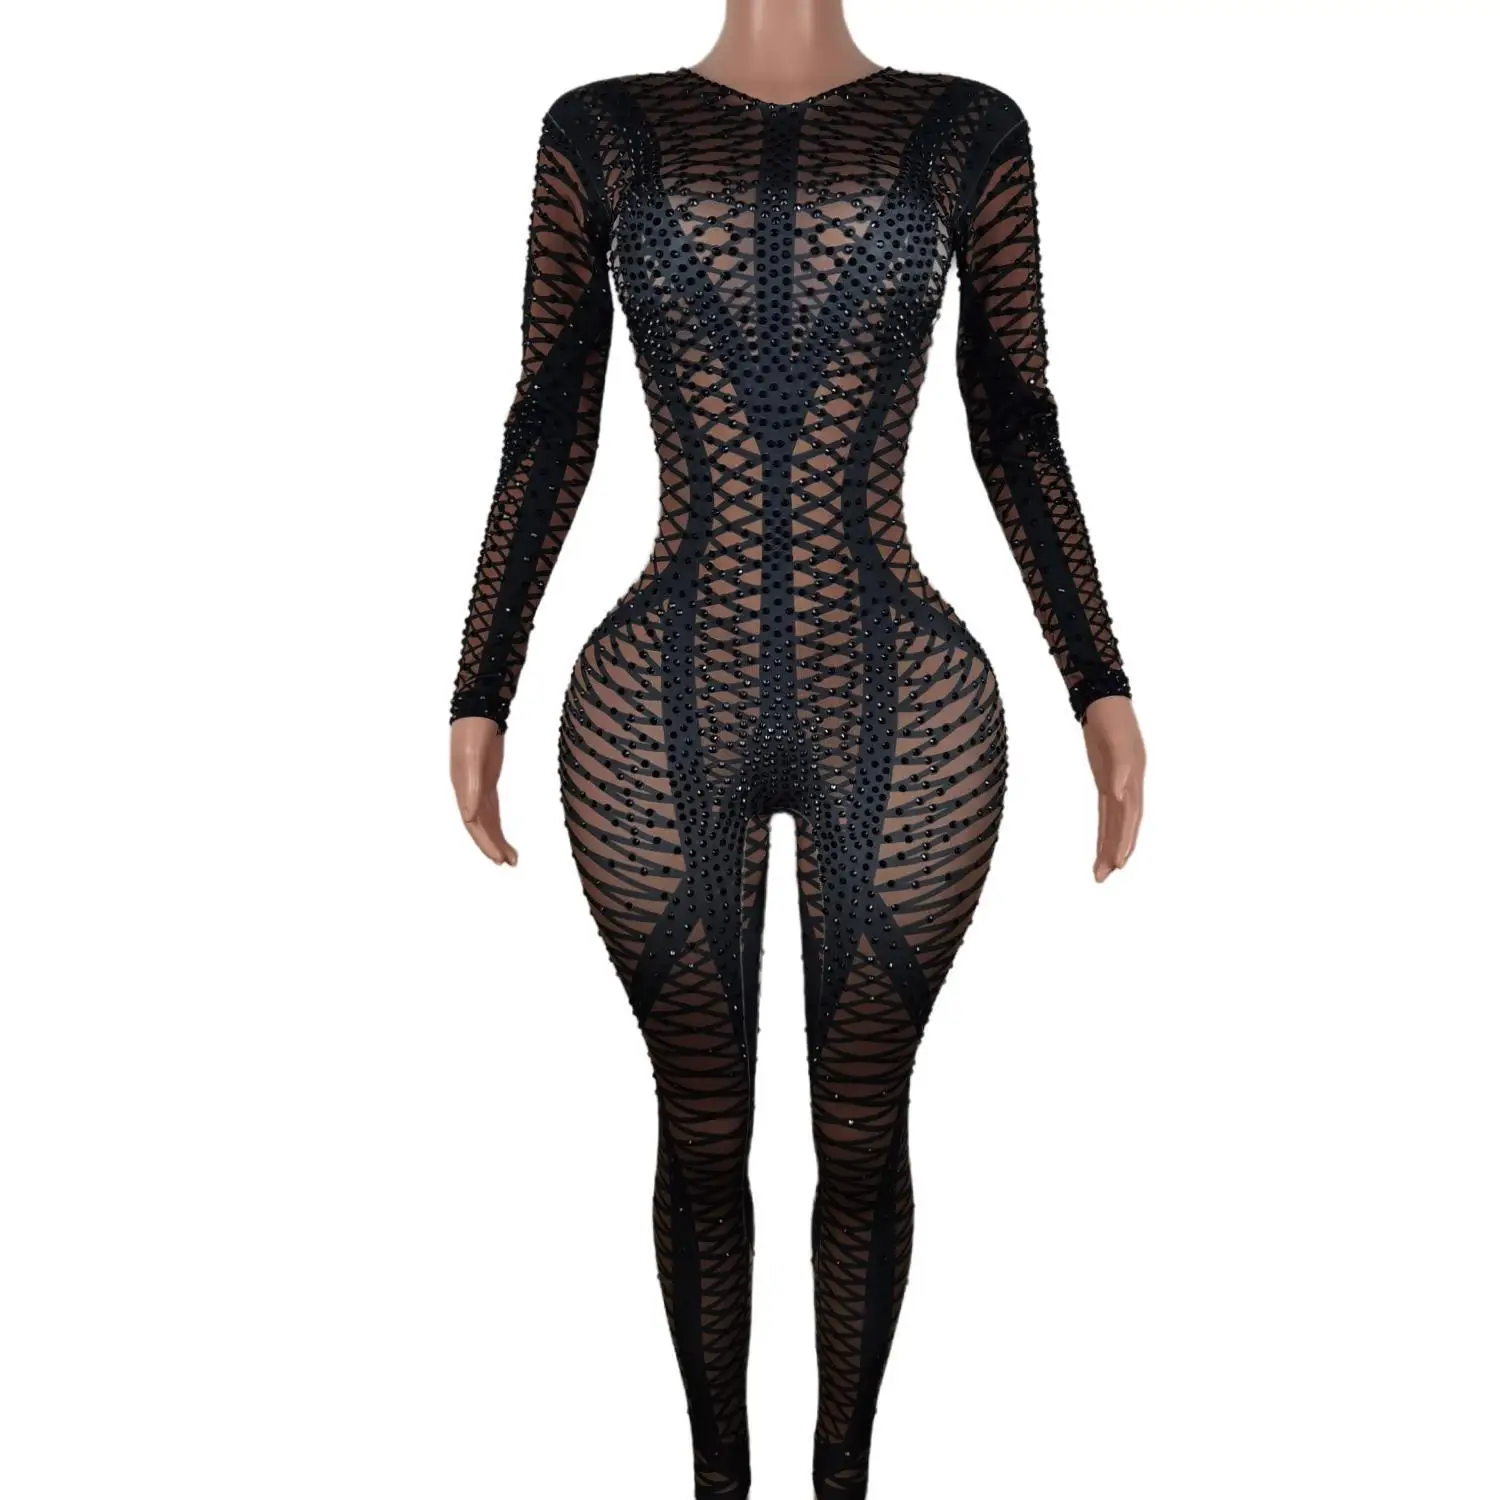 

Sexy Geometric Patterns Jumpsuit Woman Sparkly Stones Bodysuit Stage Wear Celebrate Female Singer Crystals Costume Outfit Heicha